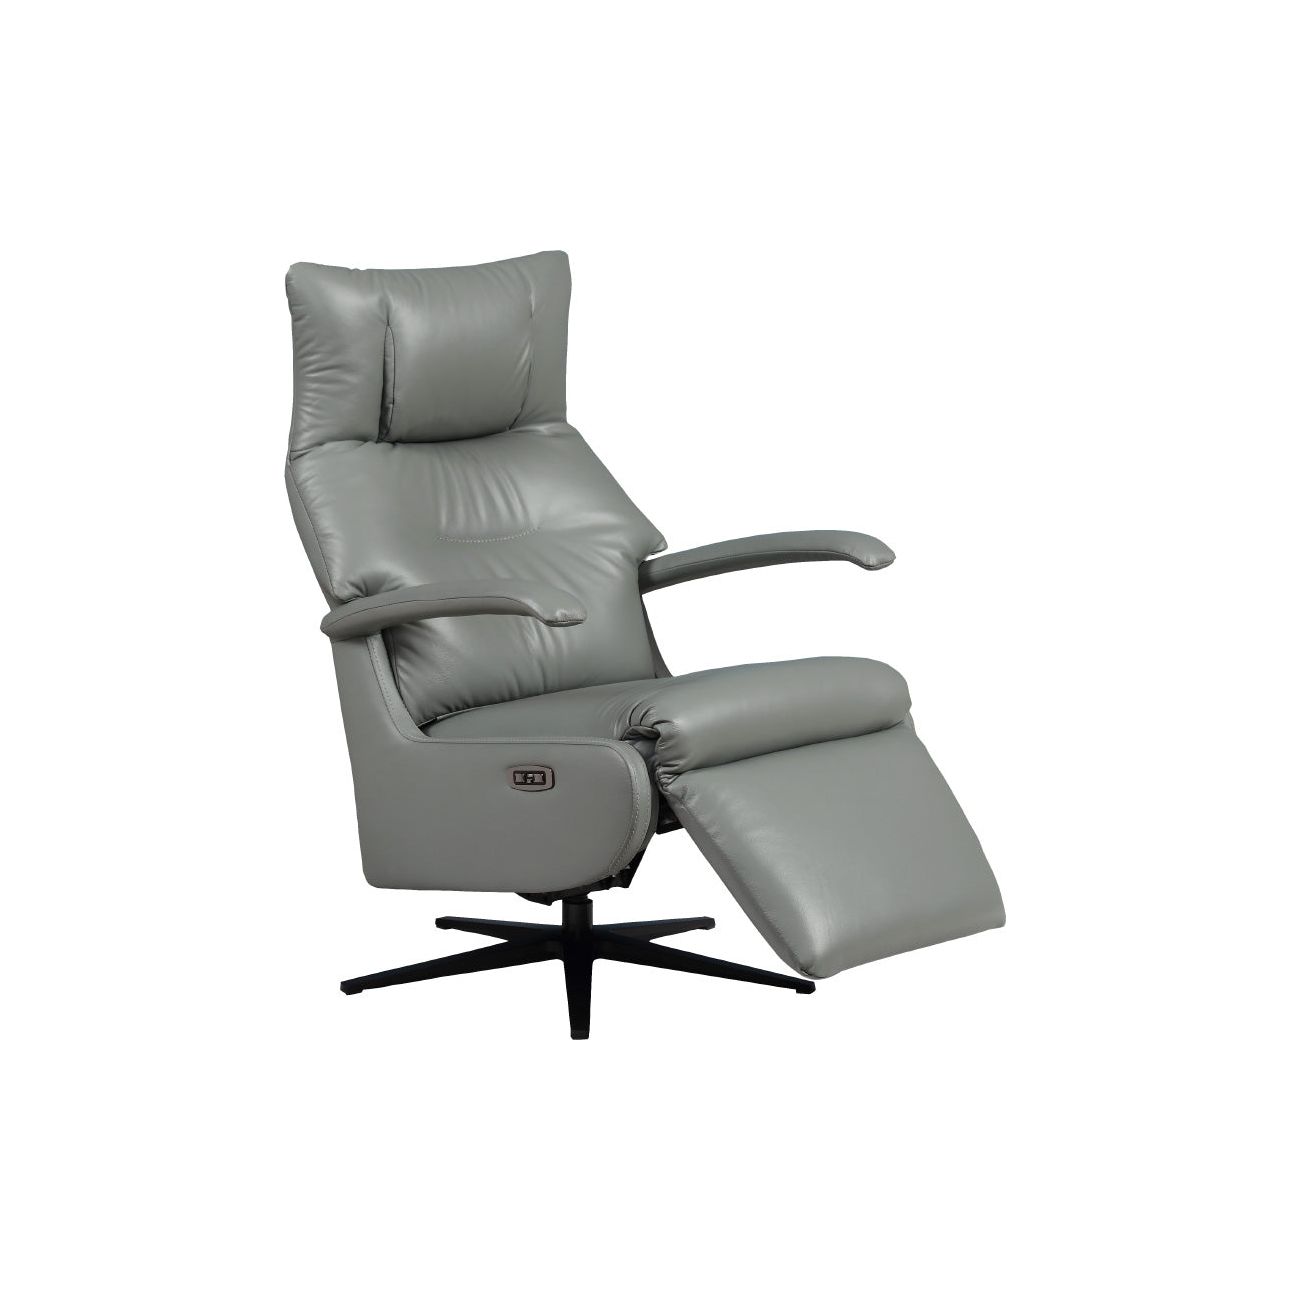 Maisy Electric Recliner Accent Chair - Steel